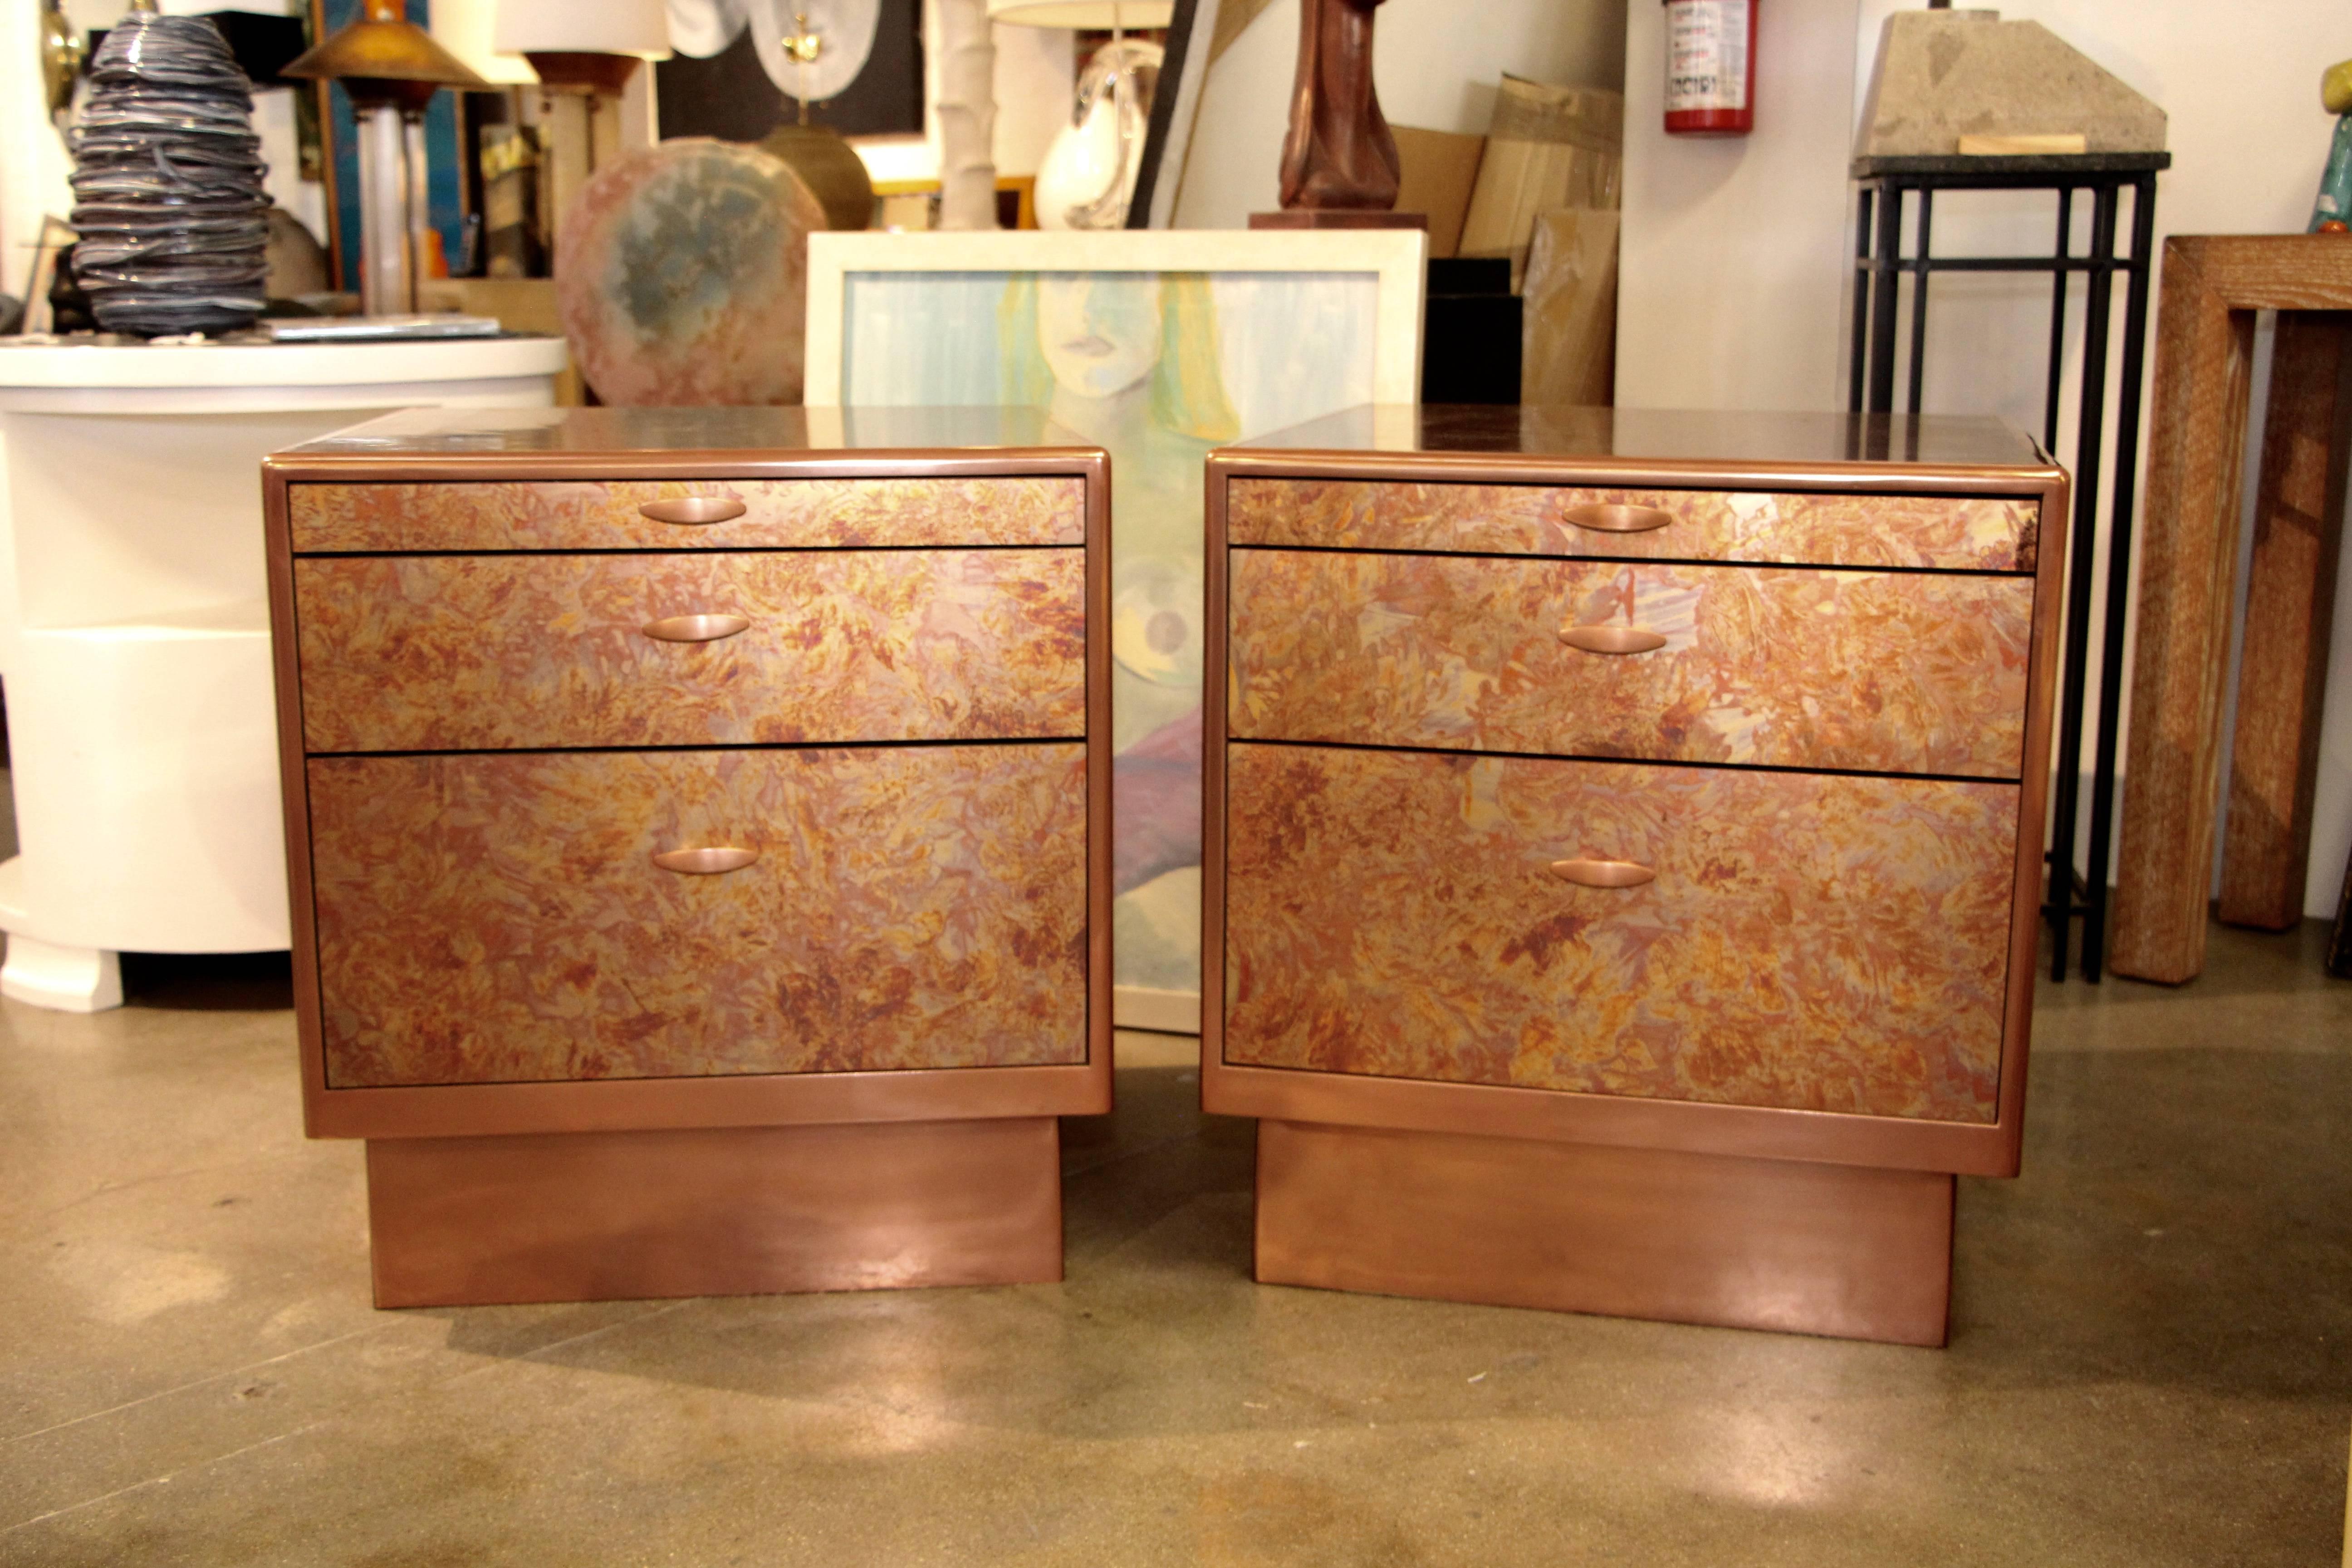 A beautiful pair of nightstands or end tables with patinated copper sheets on top front and side. The bases have been coated in copper metal as has the trim and handles. The top drawer is actually a pull out tray. The other two drawers are actually